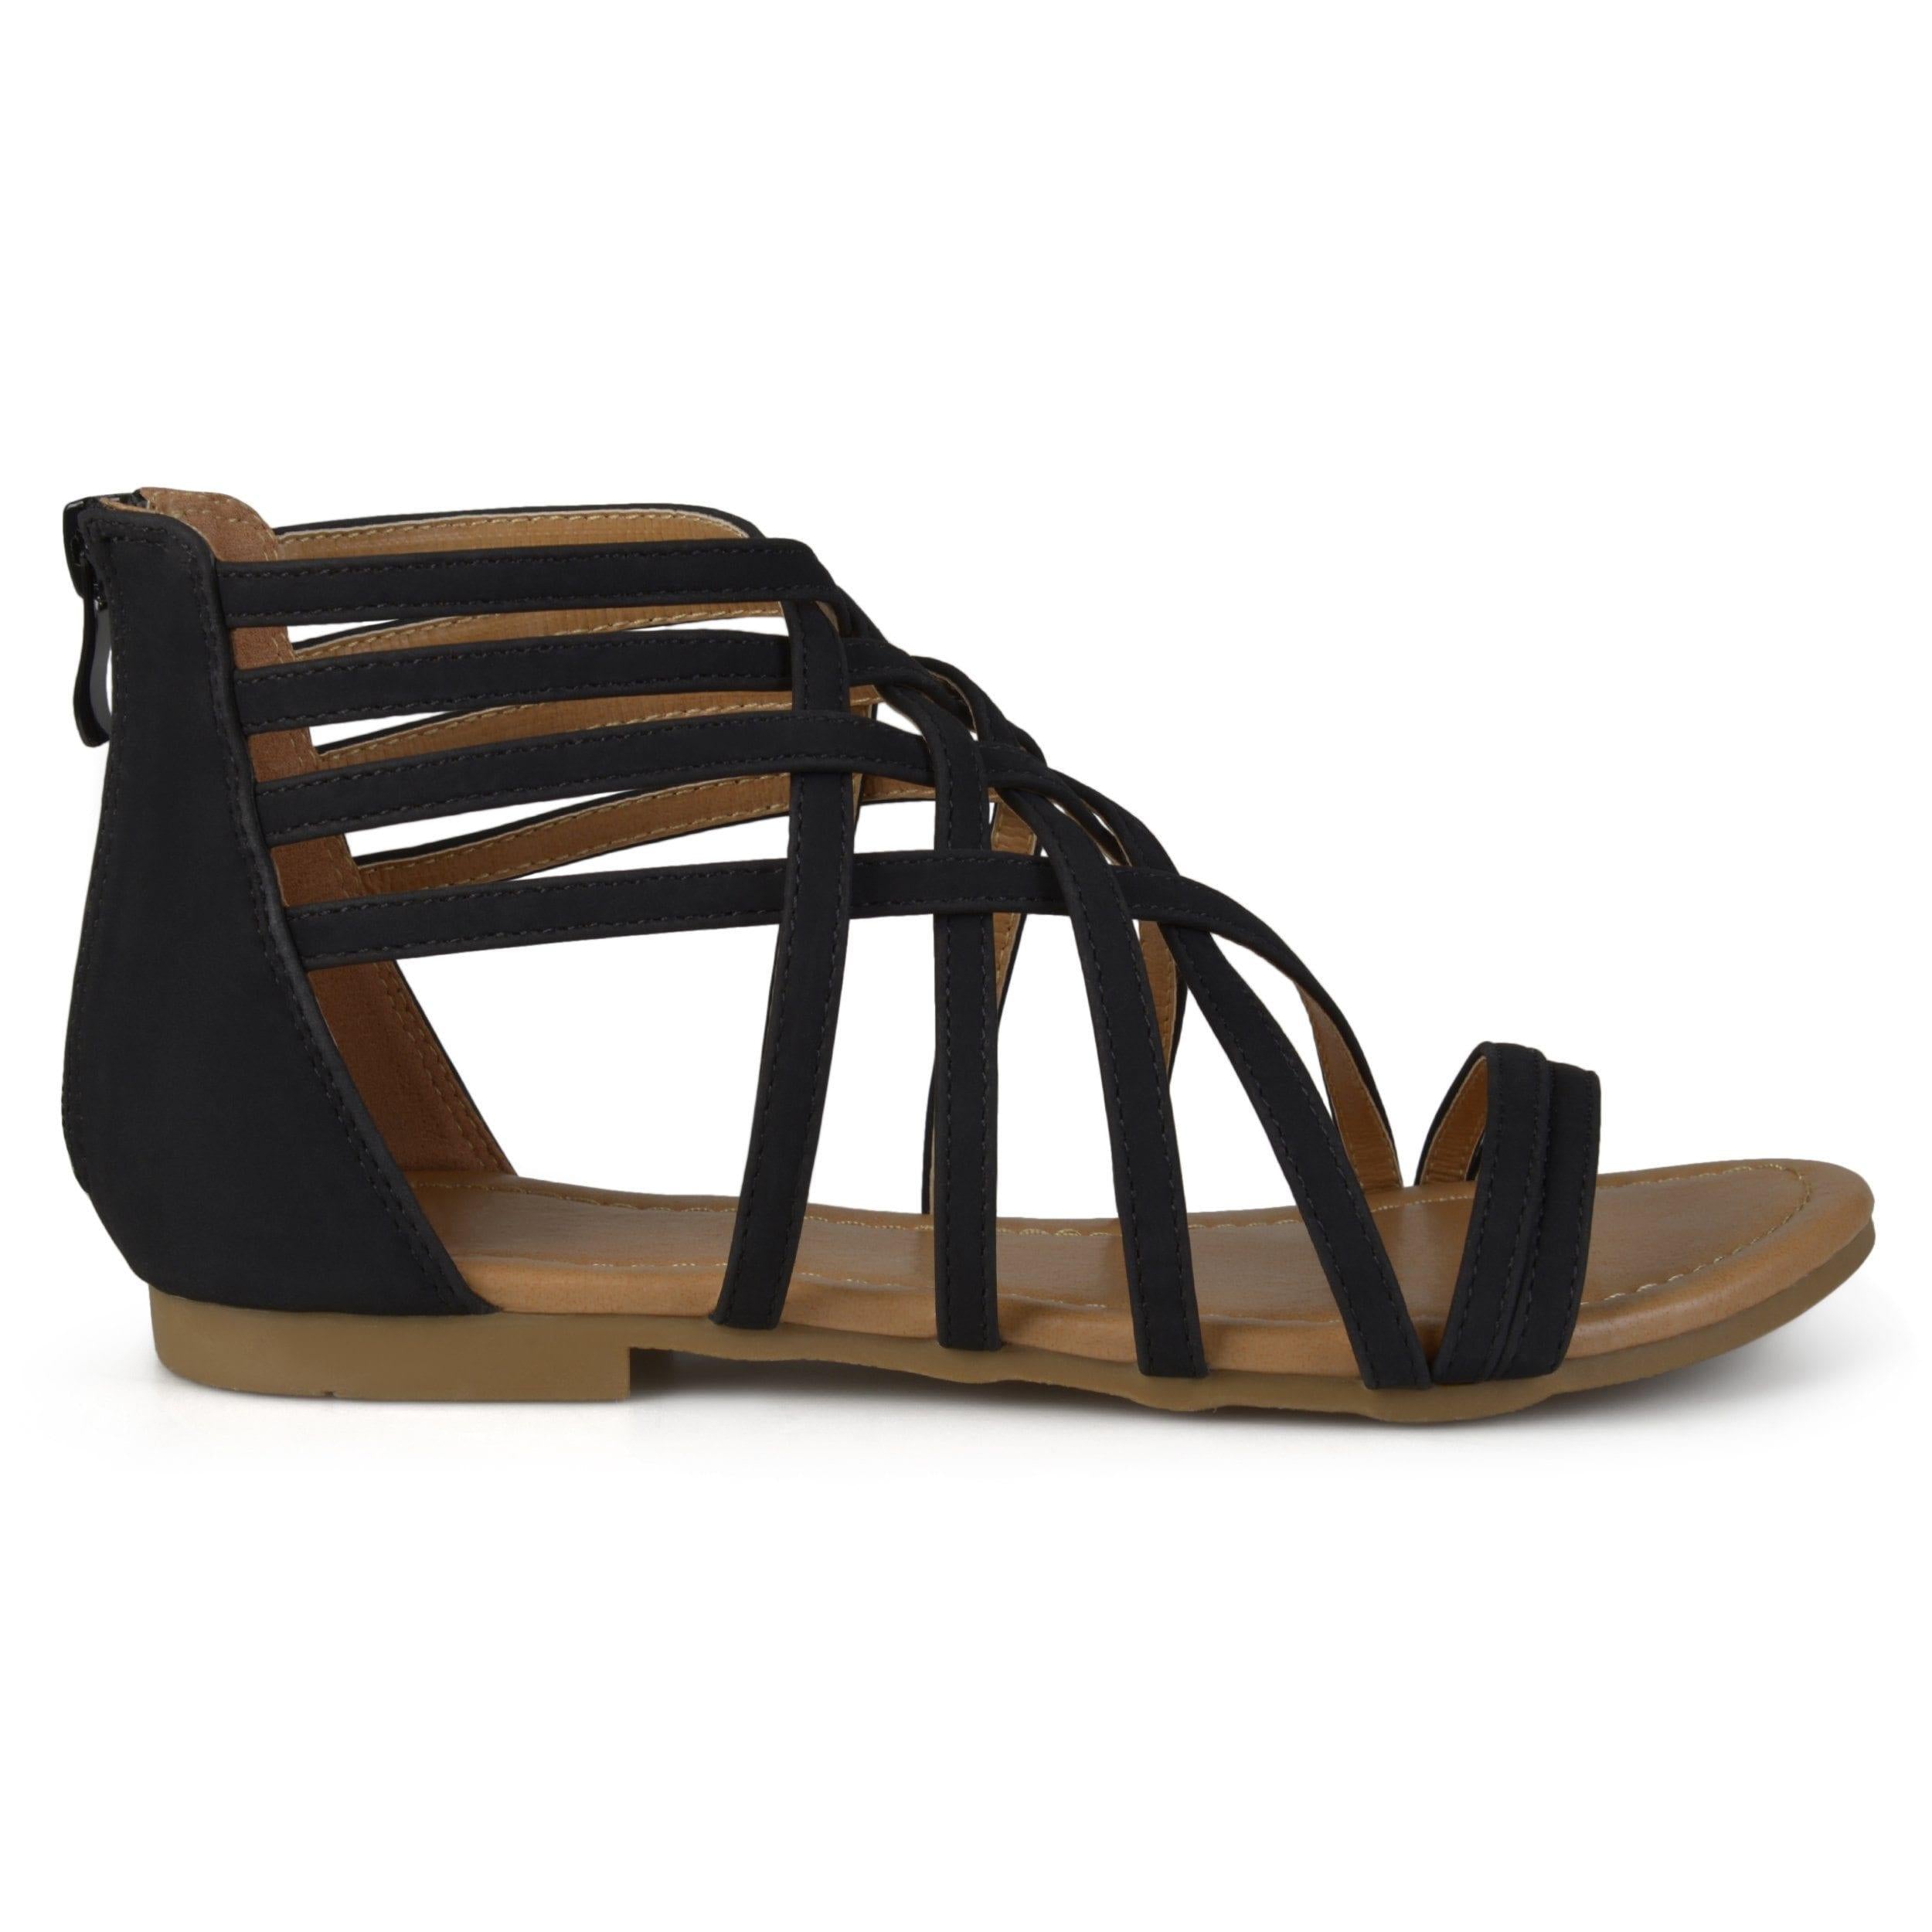 Wide Fit Sandals, Casual & Occasionwear Sandals